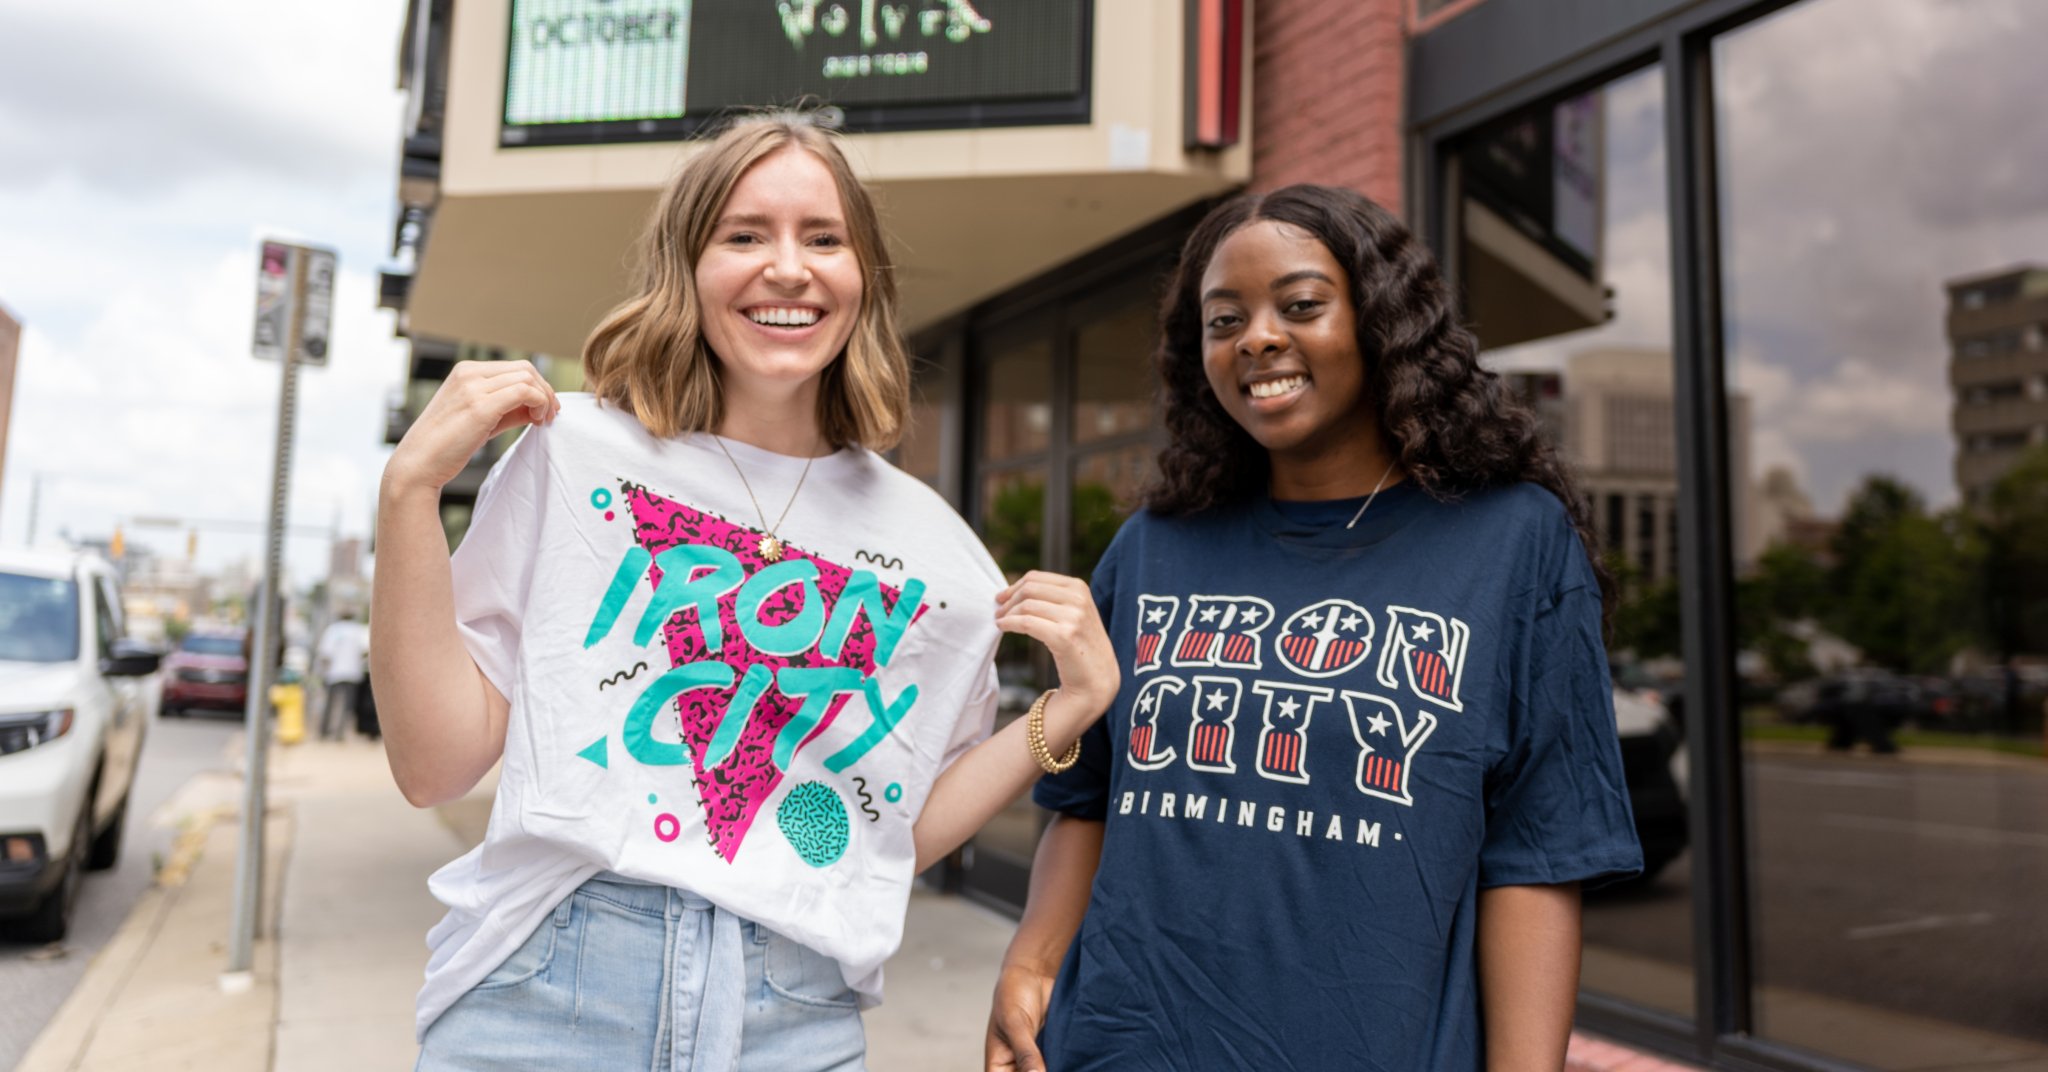 You can win Iron City Bham’s new merch [Photos + Giveaway]